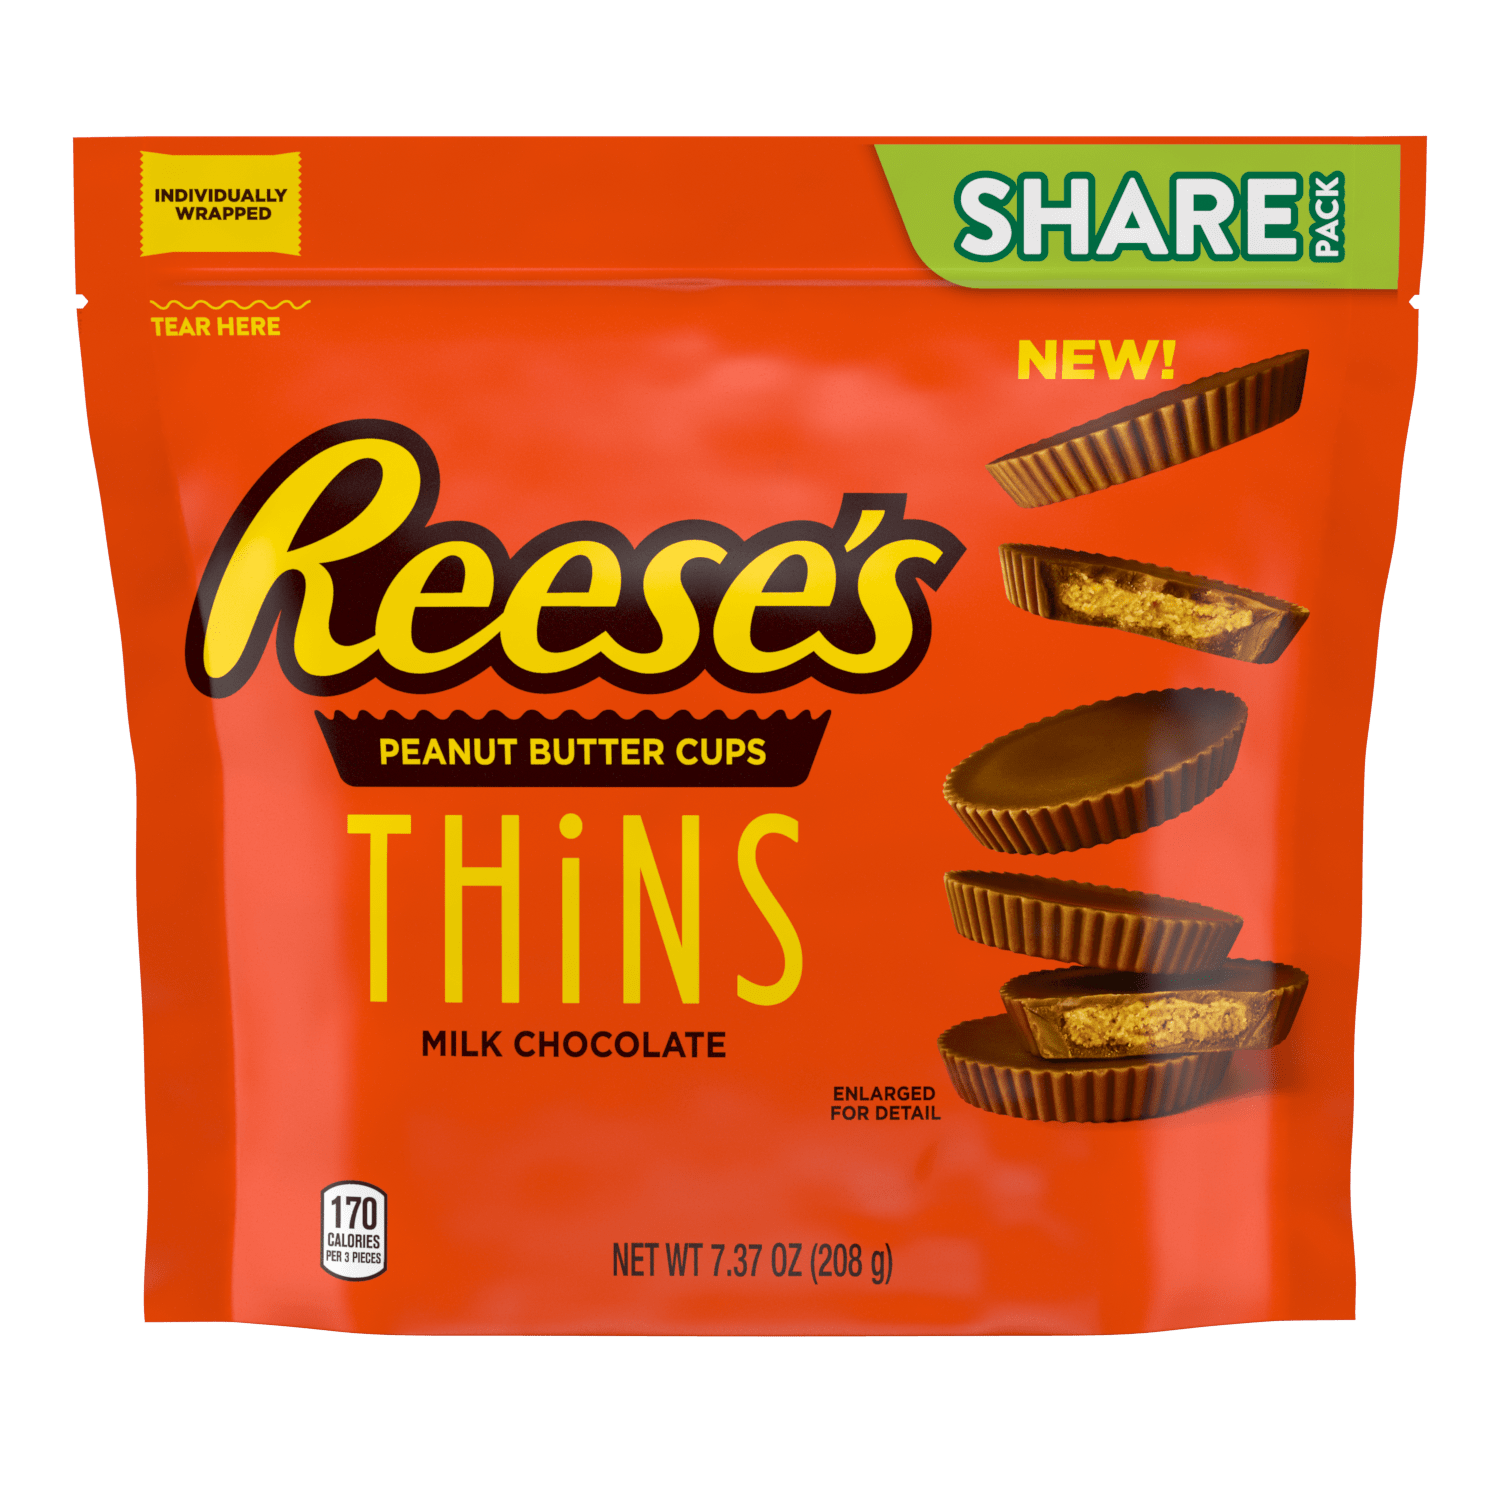 Reese's Thins Peanut Butter Cups